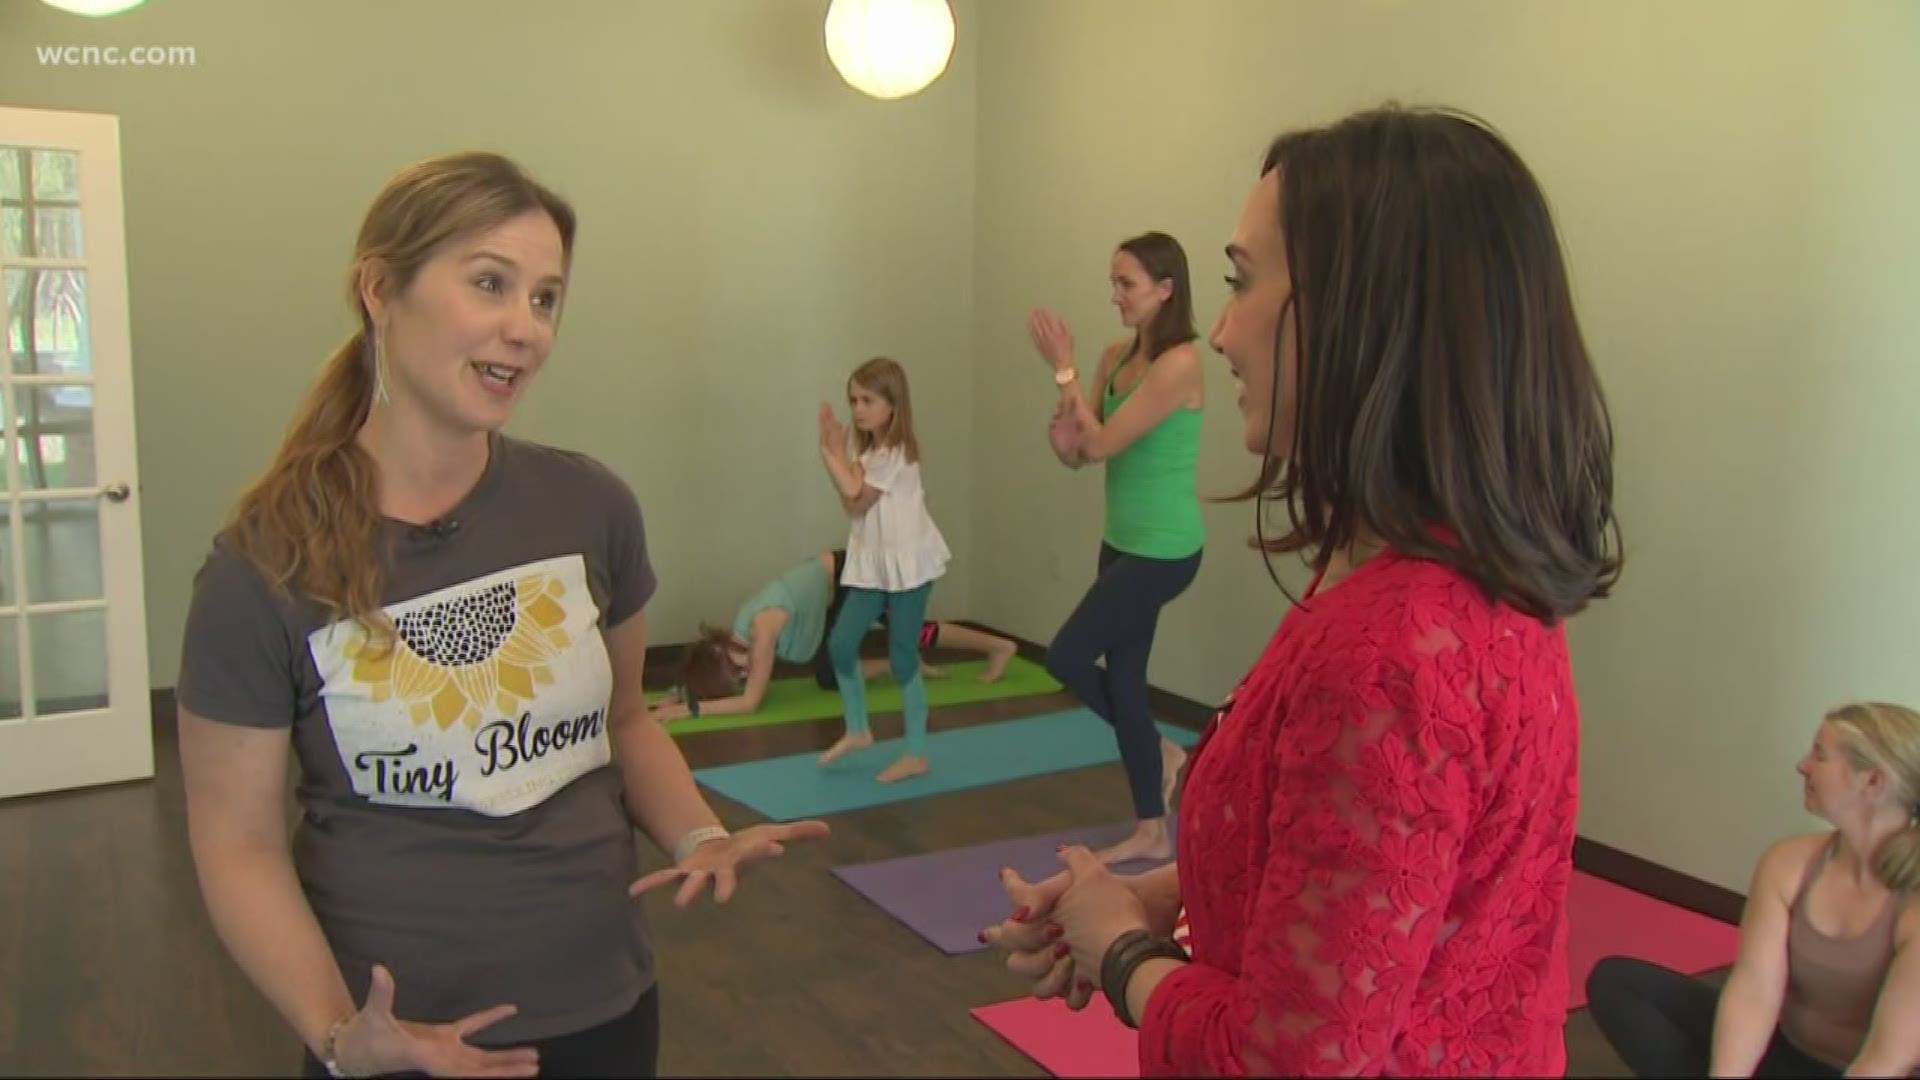 The Tiny Blooms Yoga studio in Huntersville teaches children how to take care of their bodies.